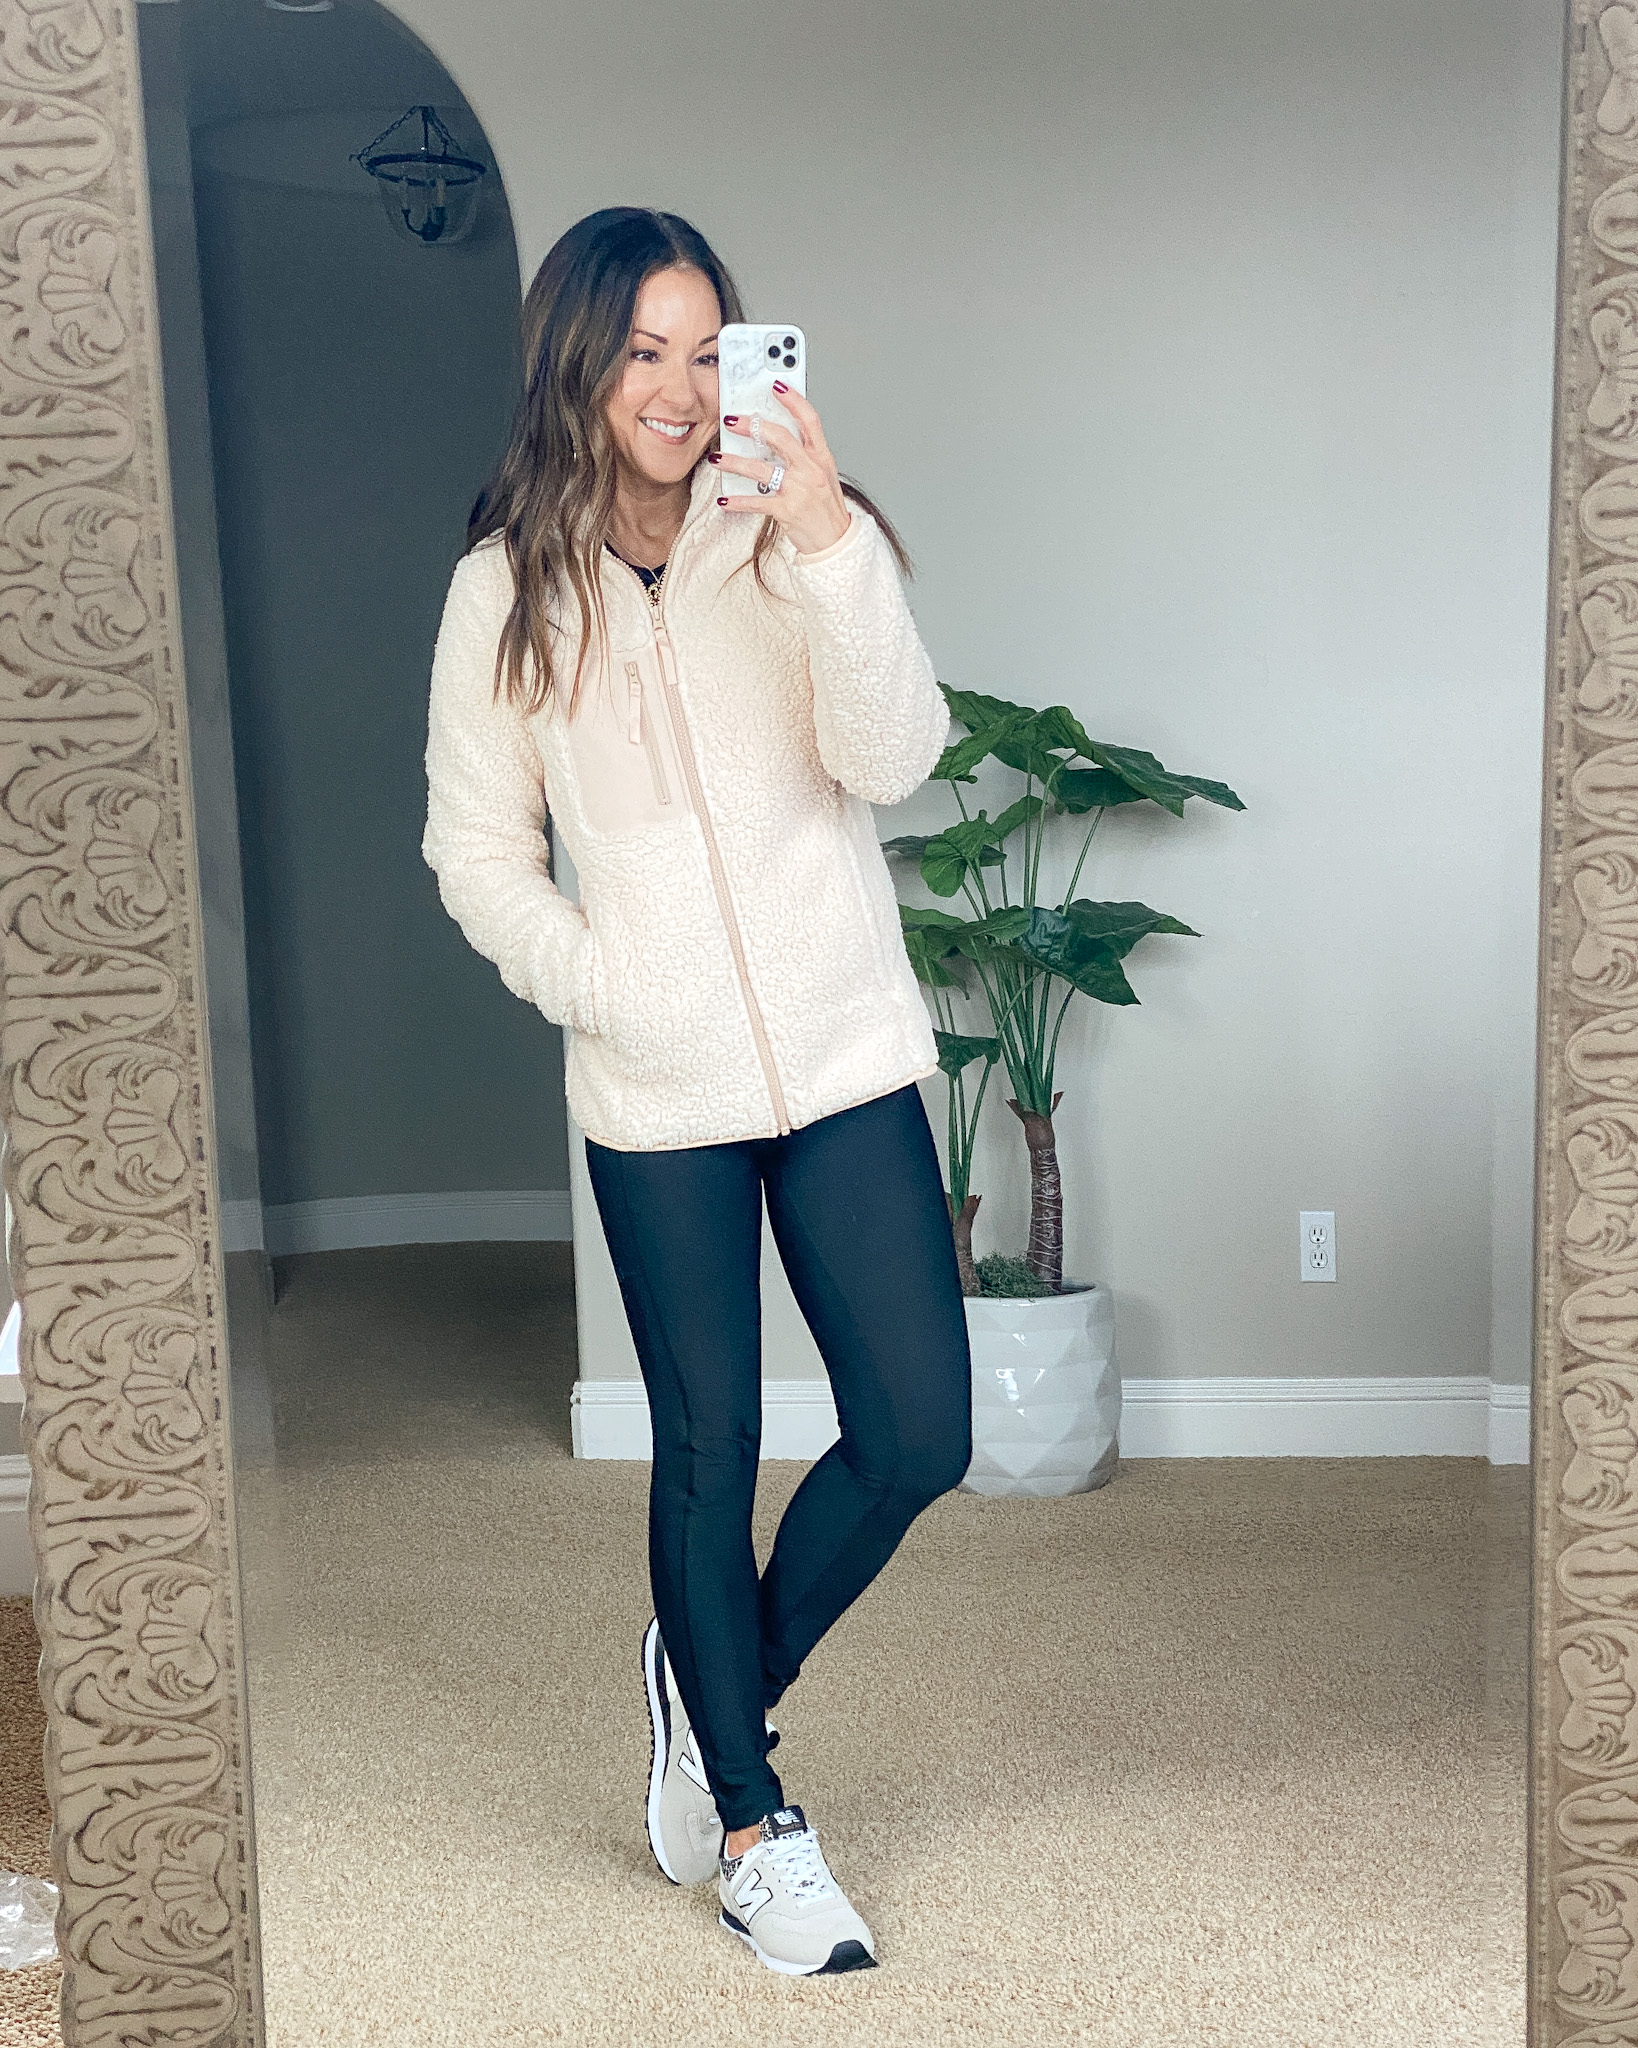  fashion item from december, cream sherpa jacket, black leggings with pockets, cheetah sneaker, new balance sneakers 